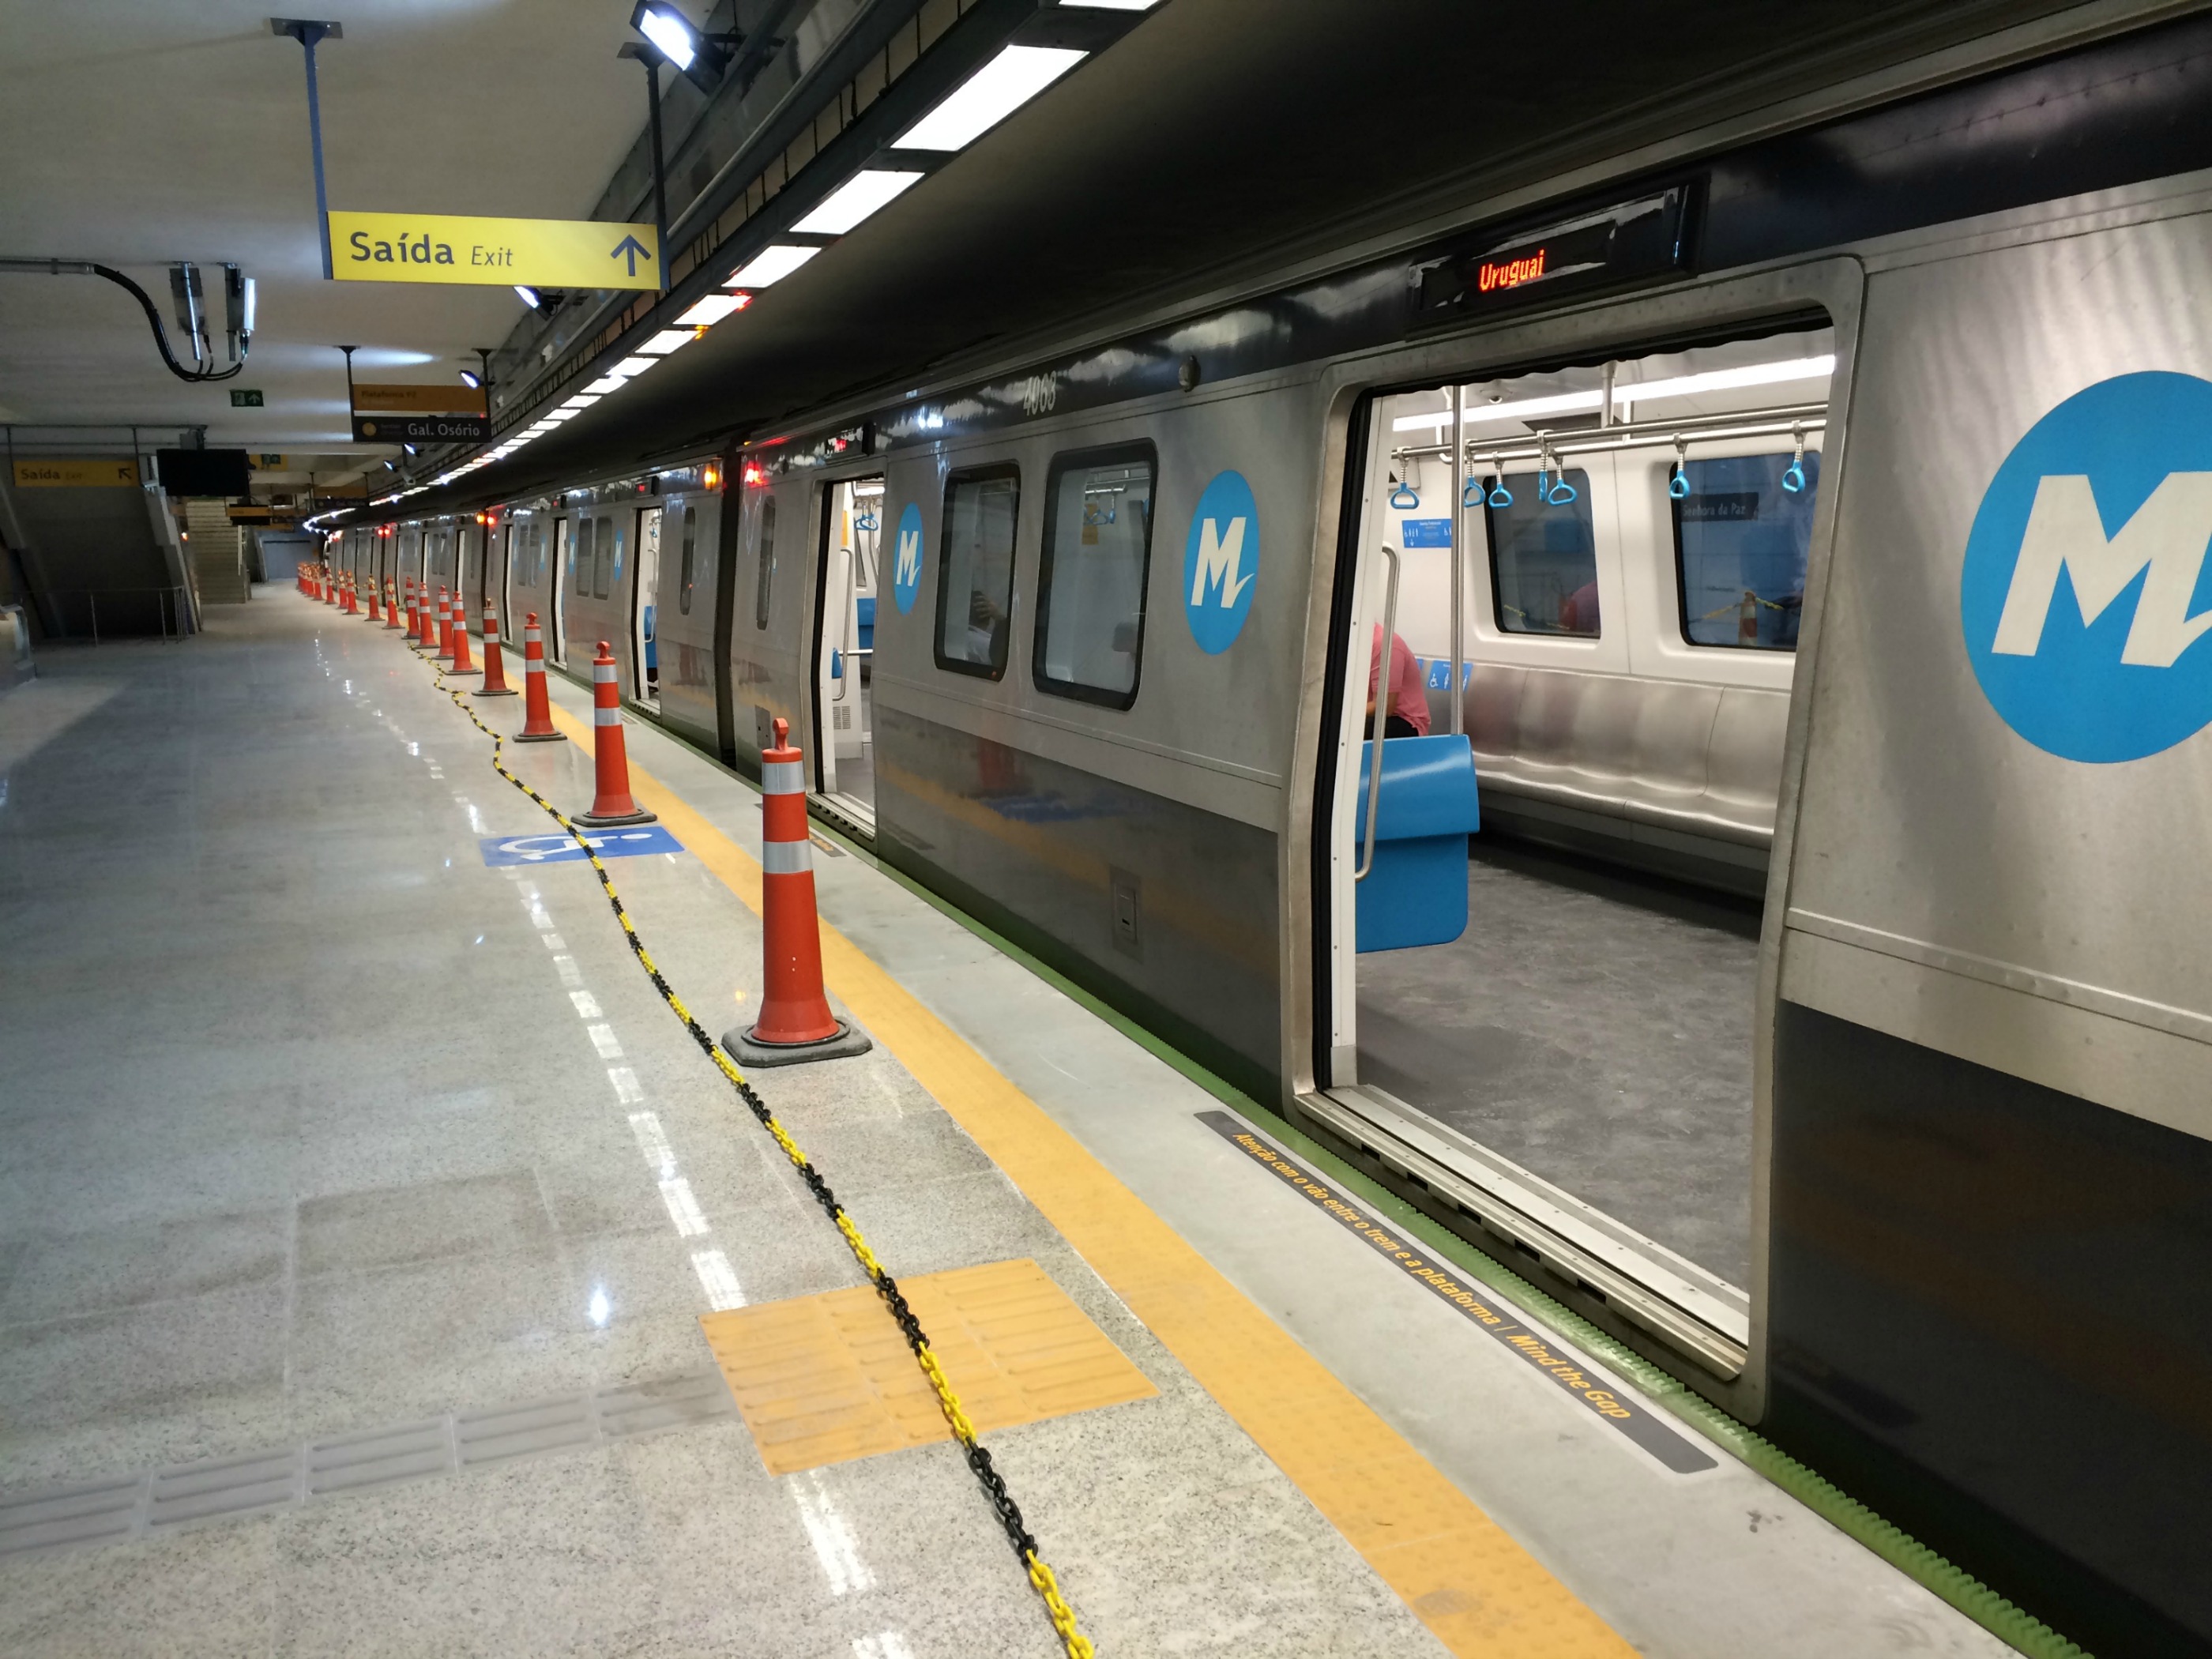 Rio completed its Metro Line 4